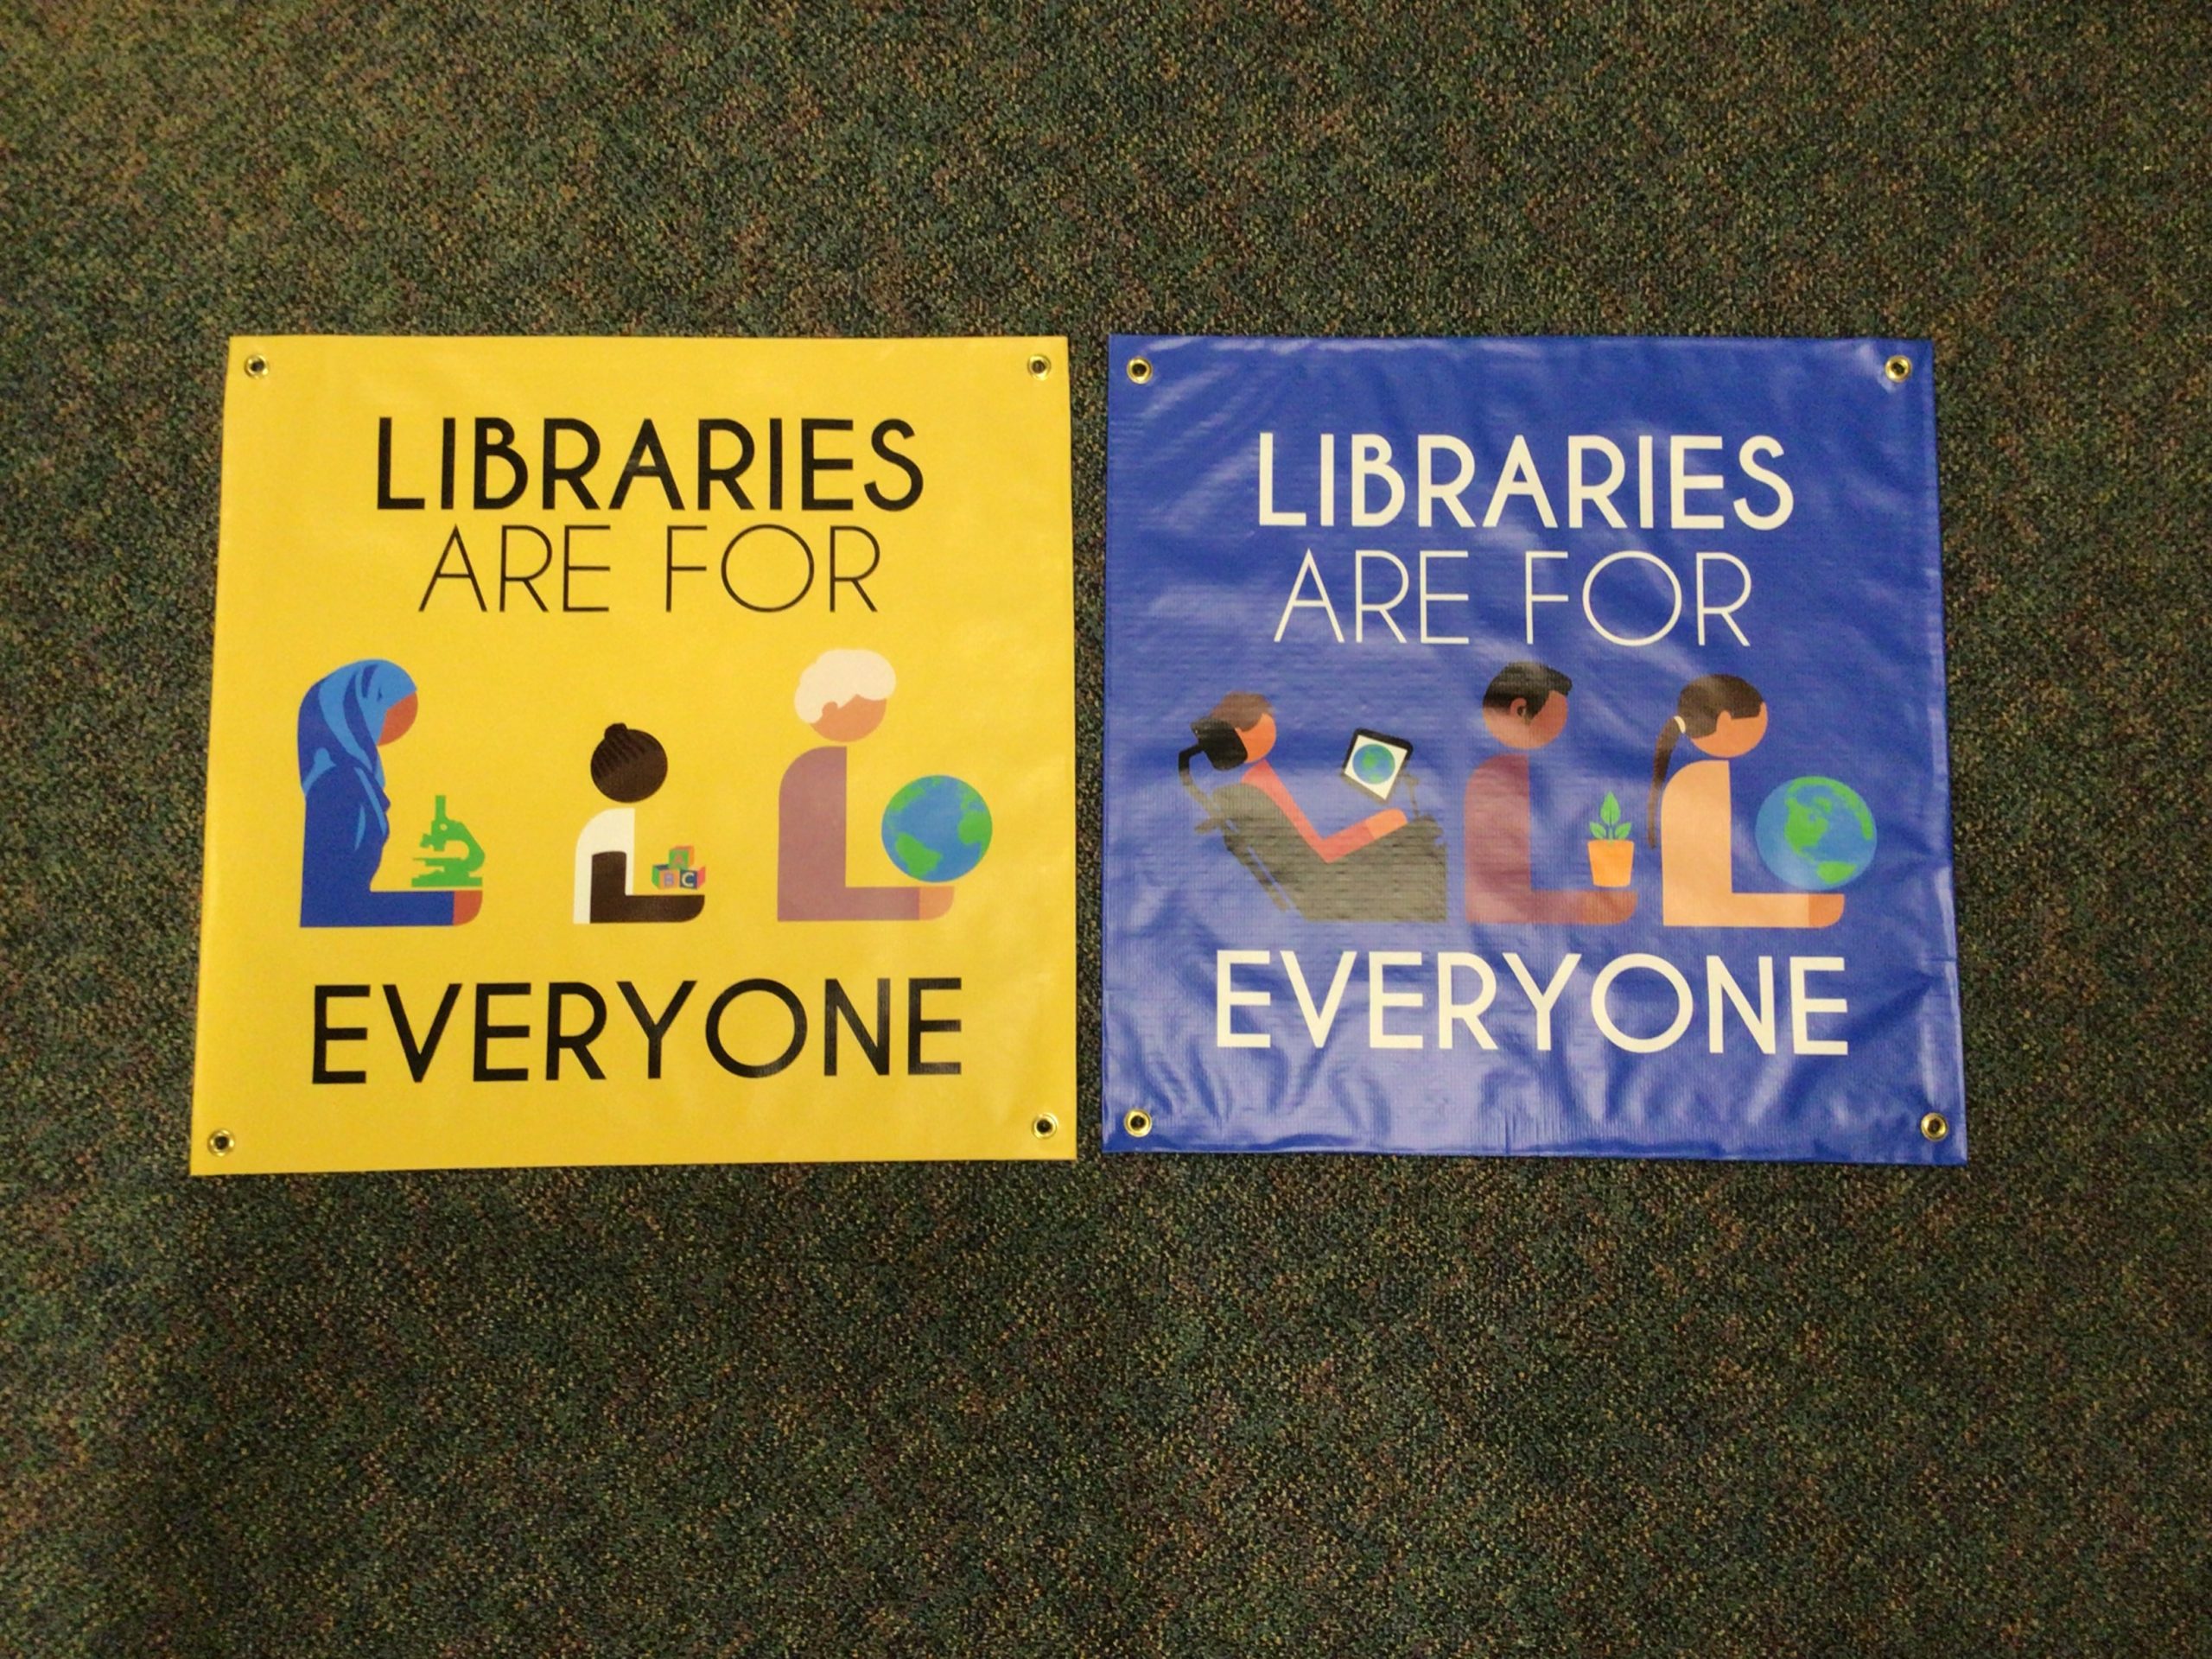 Libraries are for Everyone logo banners